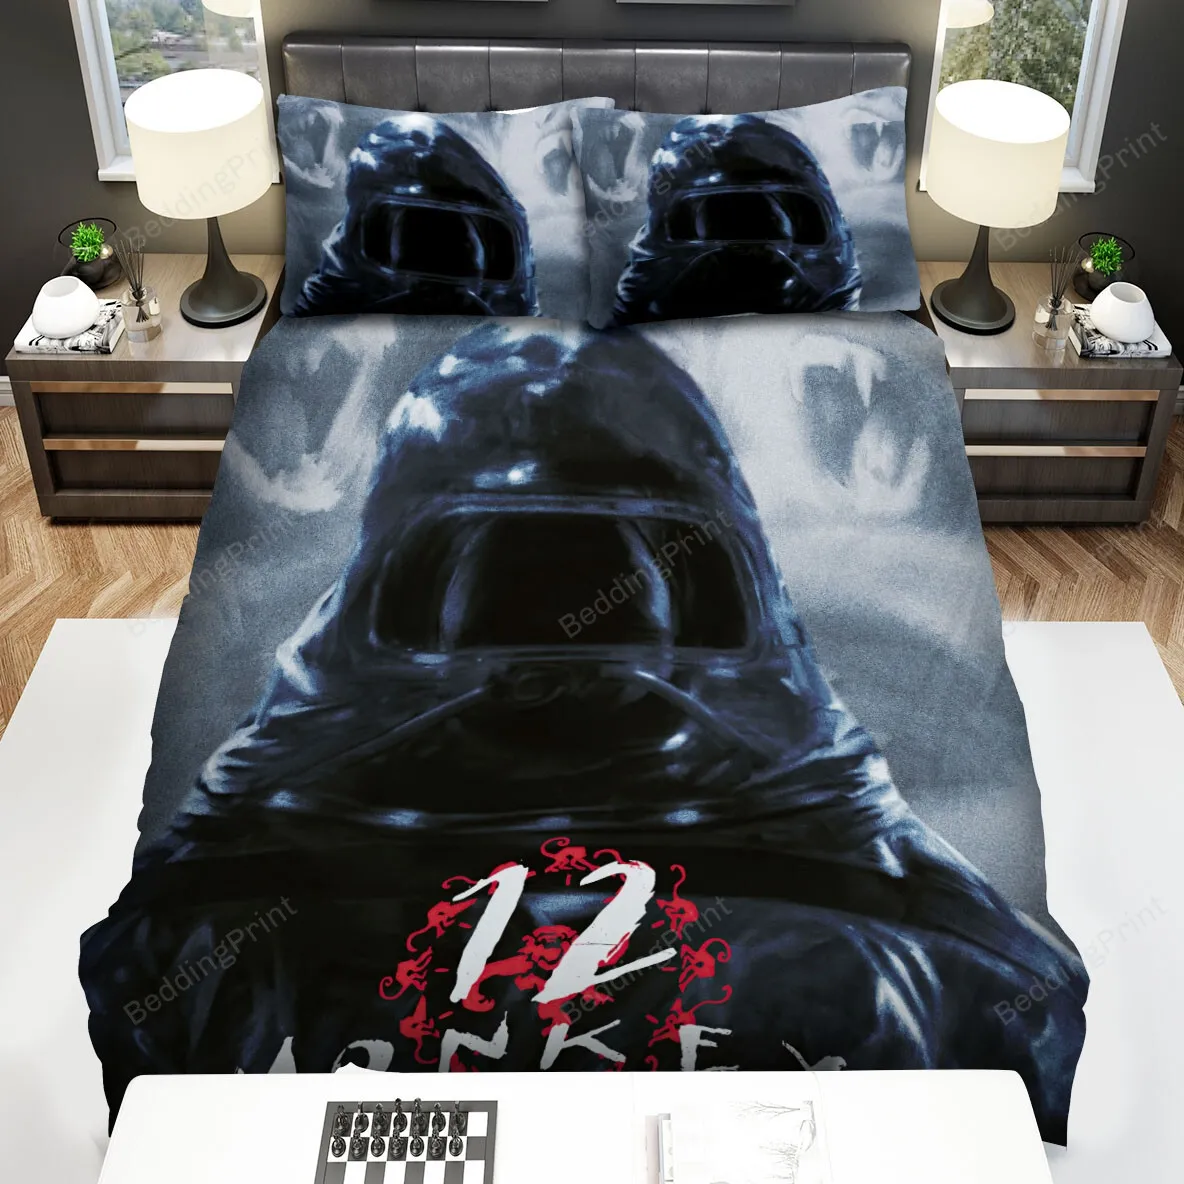 12 Monkeys (20152018) Protective Gear Movie Poster Bed Sheets Spread Comforter Duvet Cover Bedding Sets